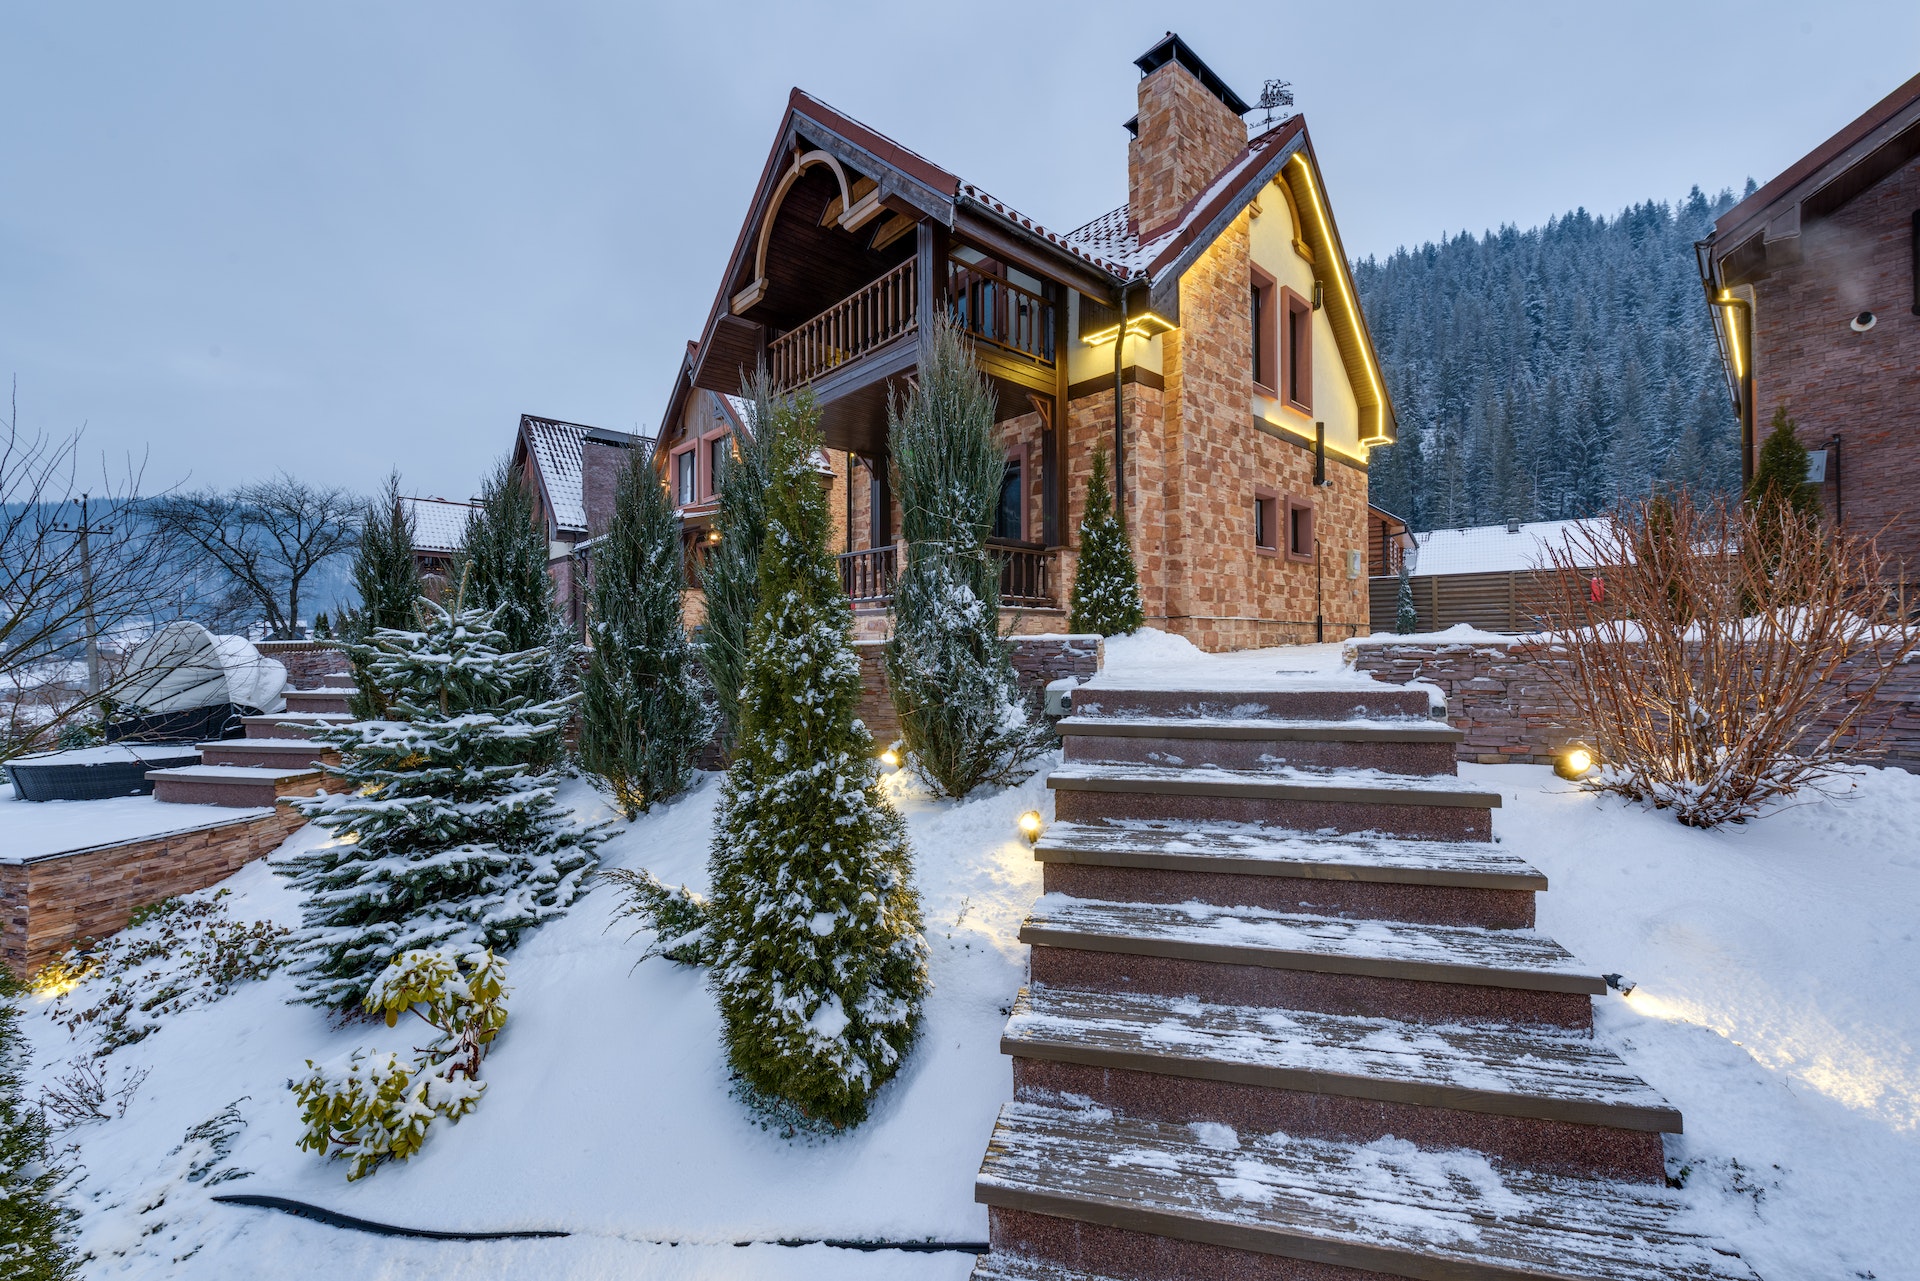 8 Key Reasons to Book a Winter Getaway to a Mountain Resort